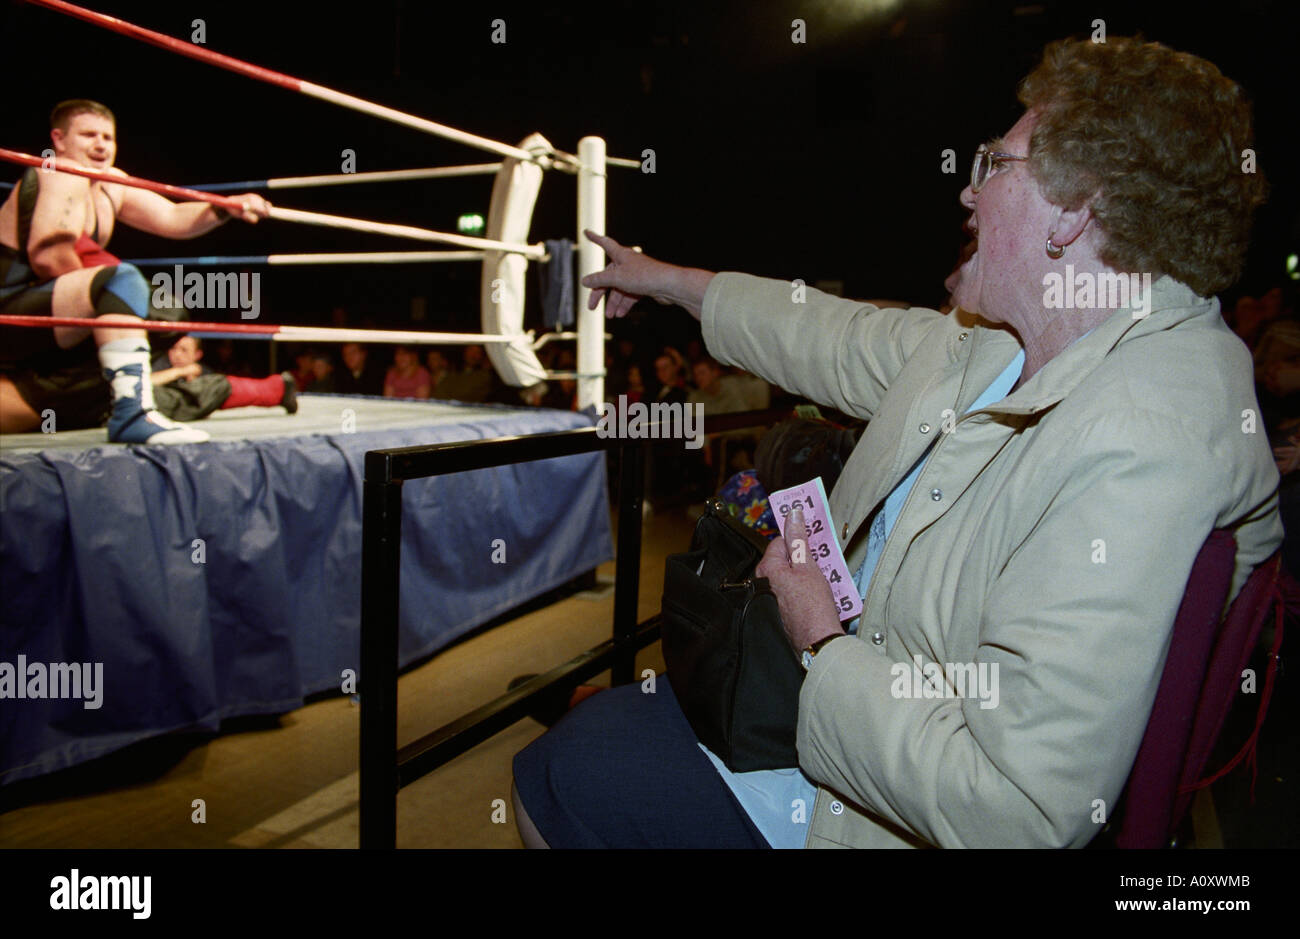 Pavilion Theatre, Worthing, England, UK Ringside wrestling fan yelling disapproval at foul play. Stock Photo